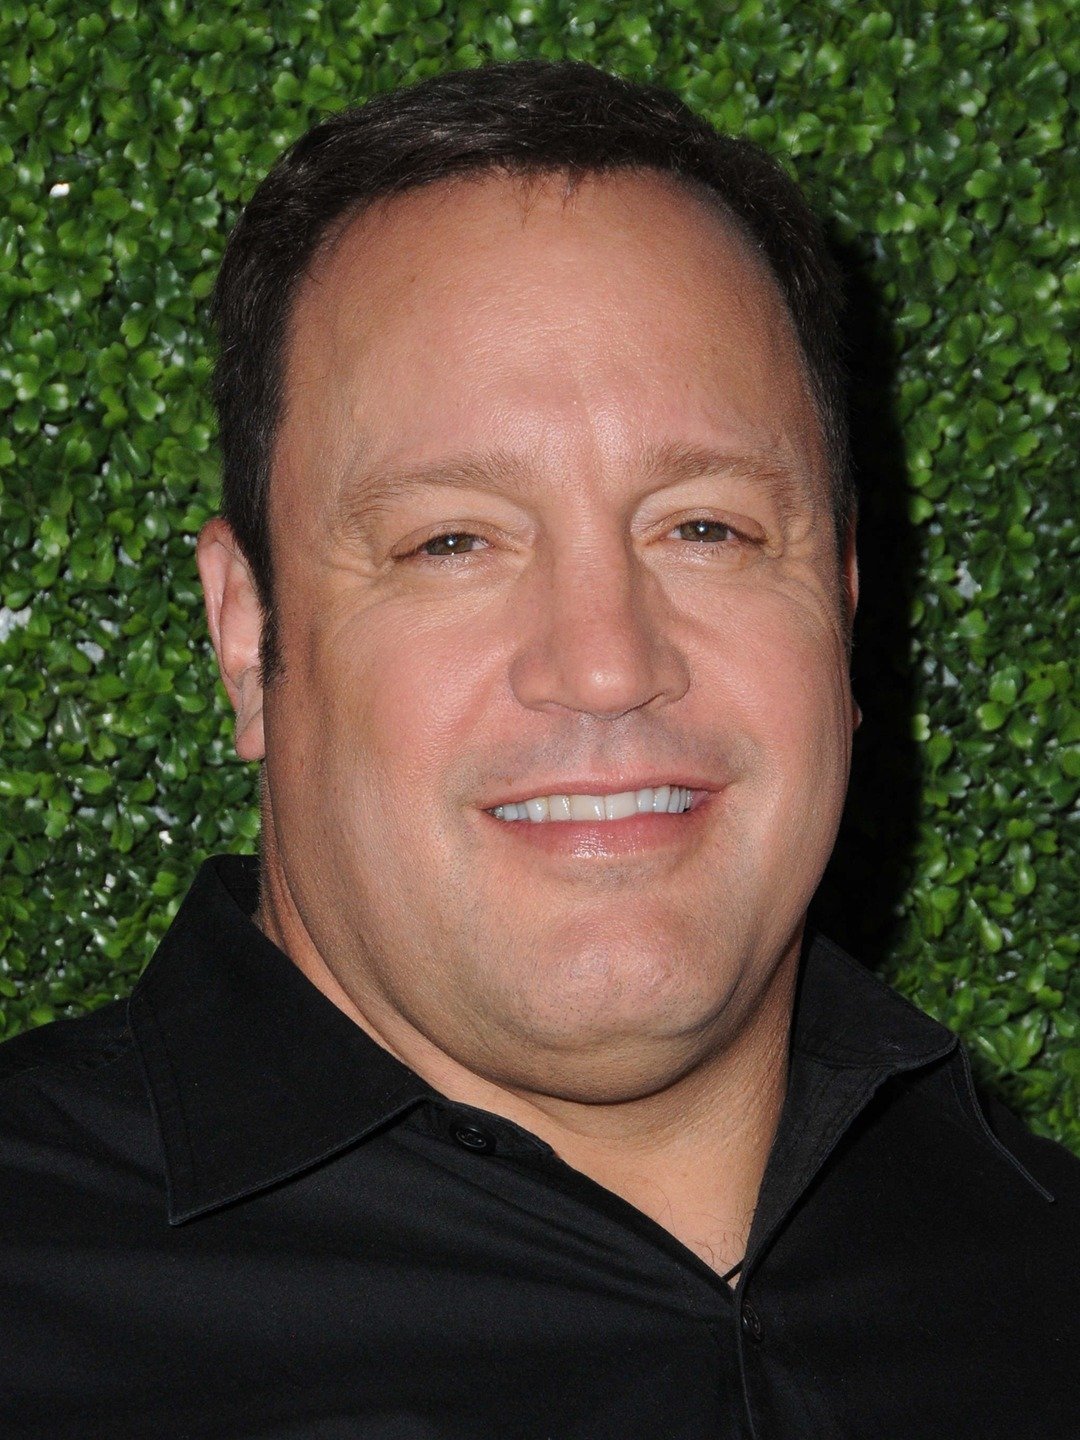 Pictures Of Kevin James As A Teenager